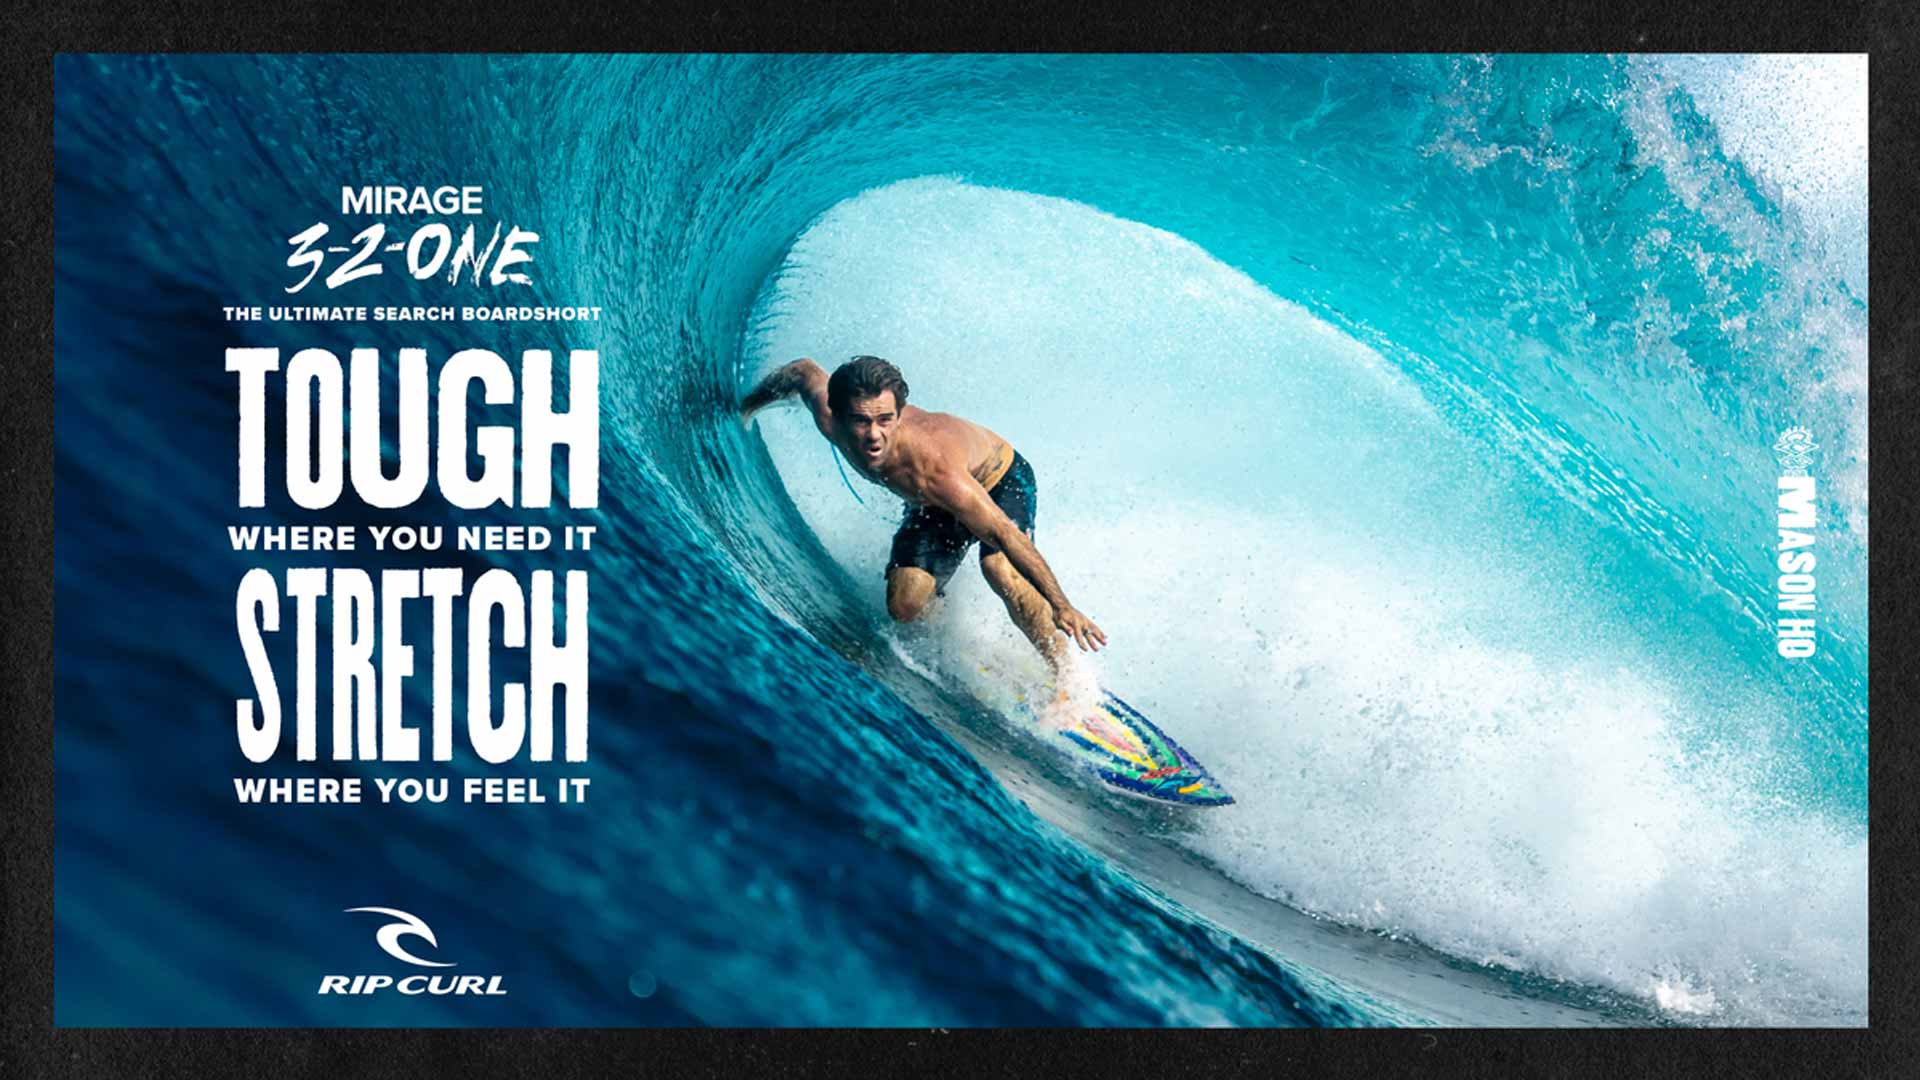 Mason Ho surfing with text overlay 